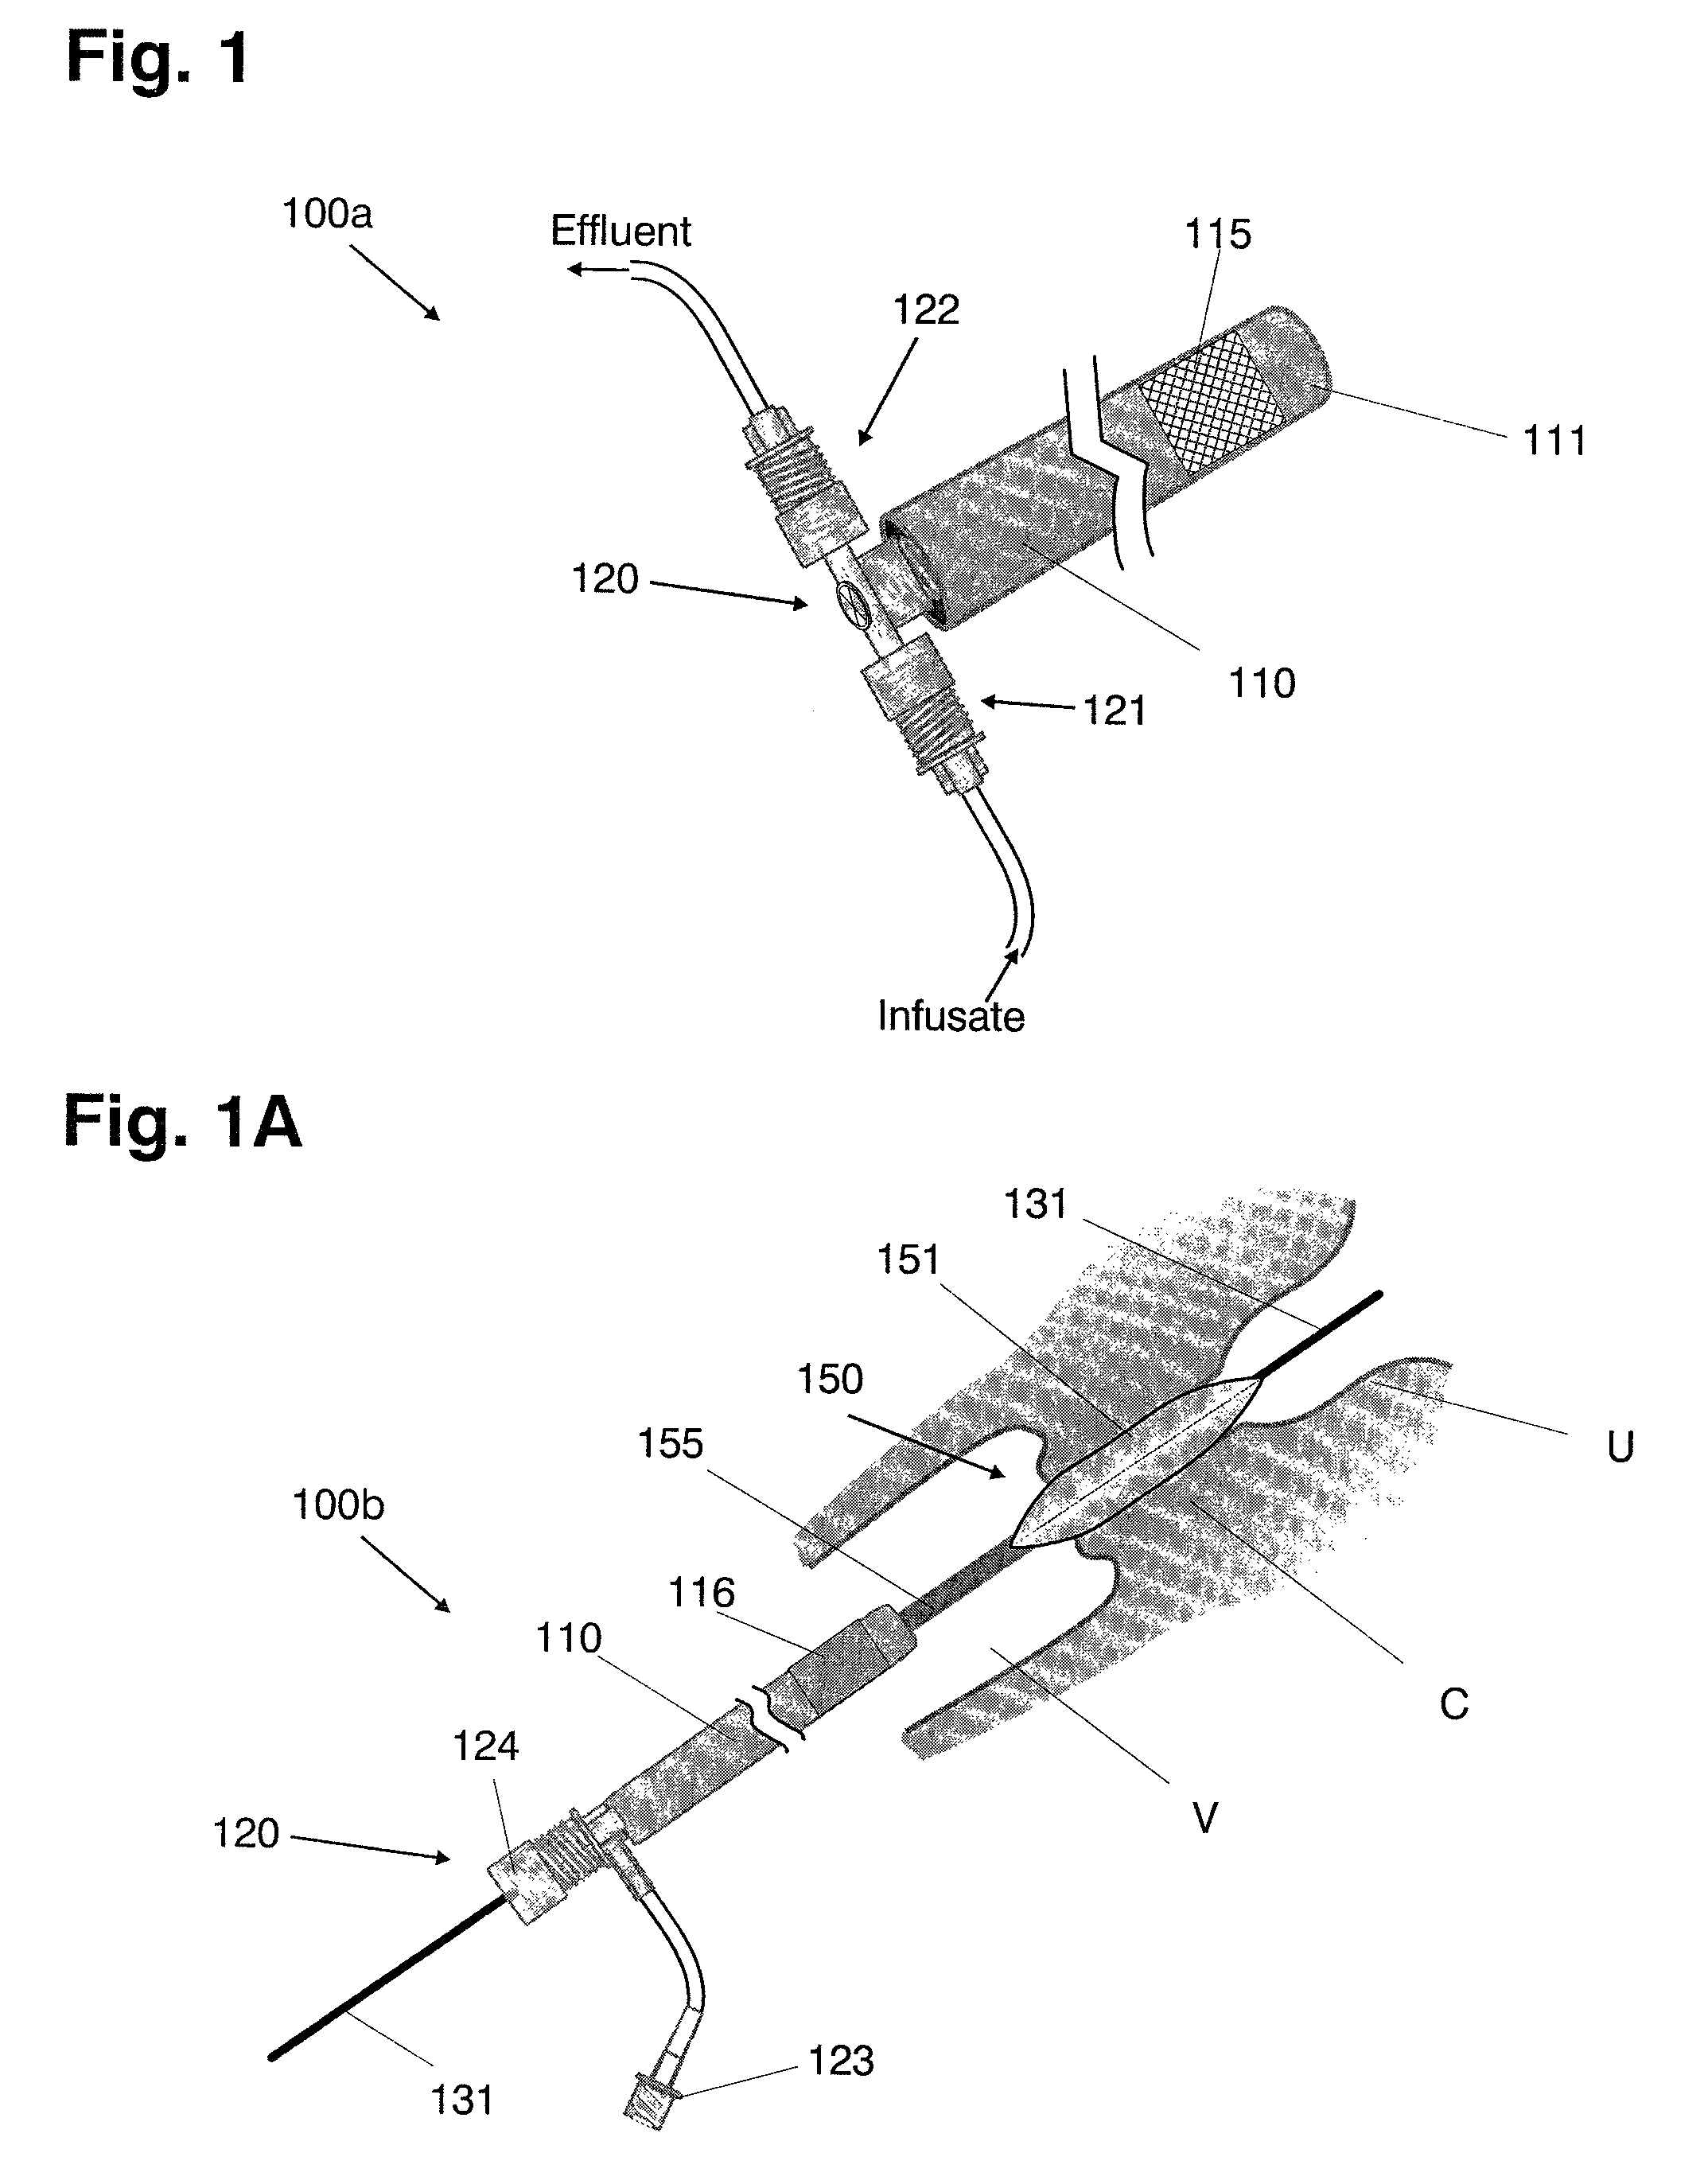 Systems and methods for preventing intravasation during intrauterine procedures